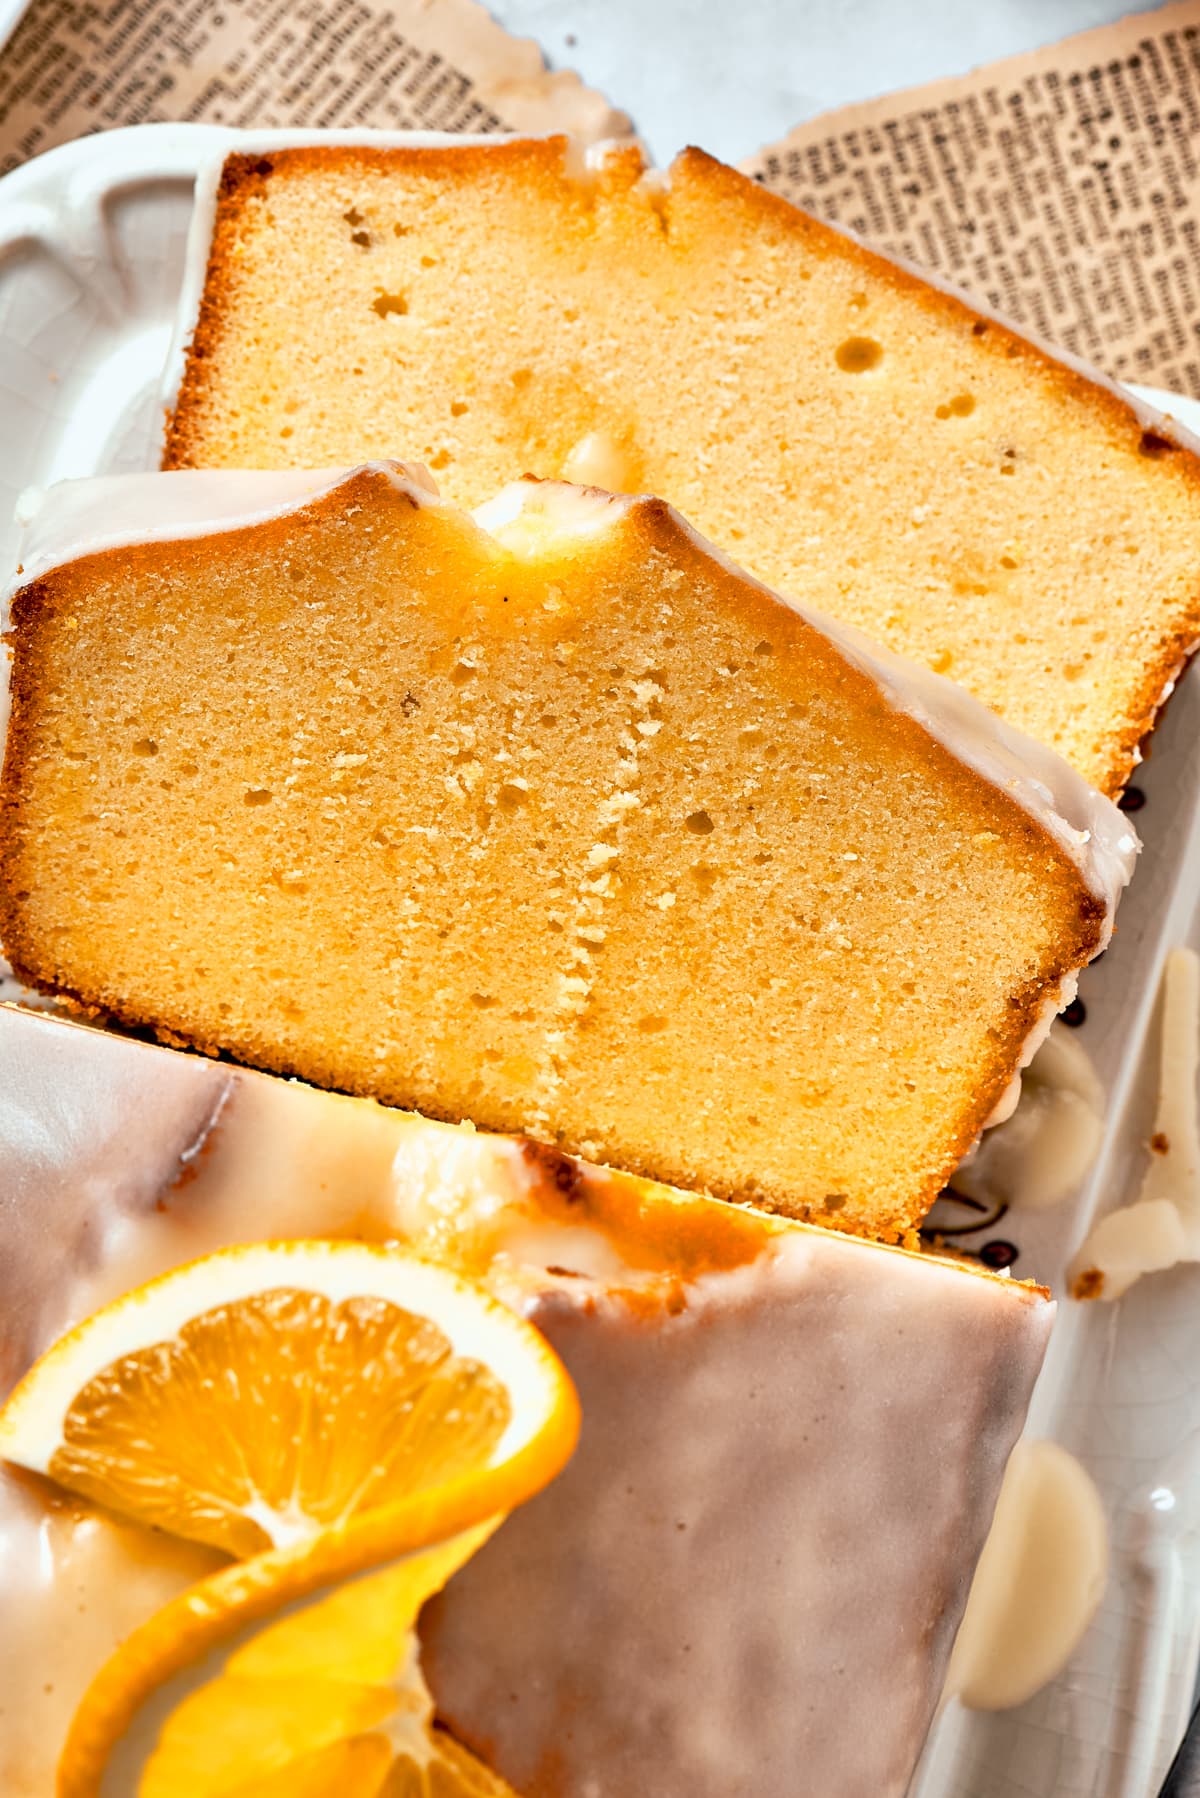 An image of two slices of cake.